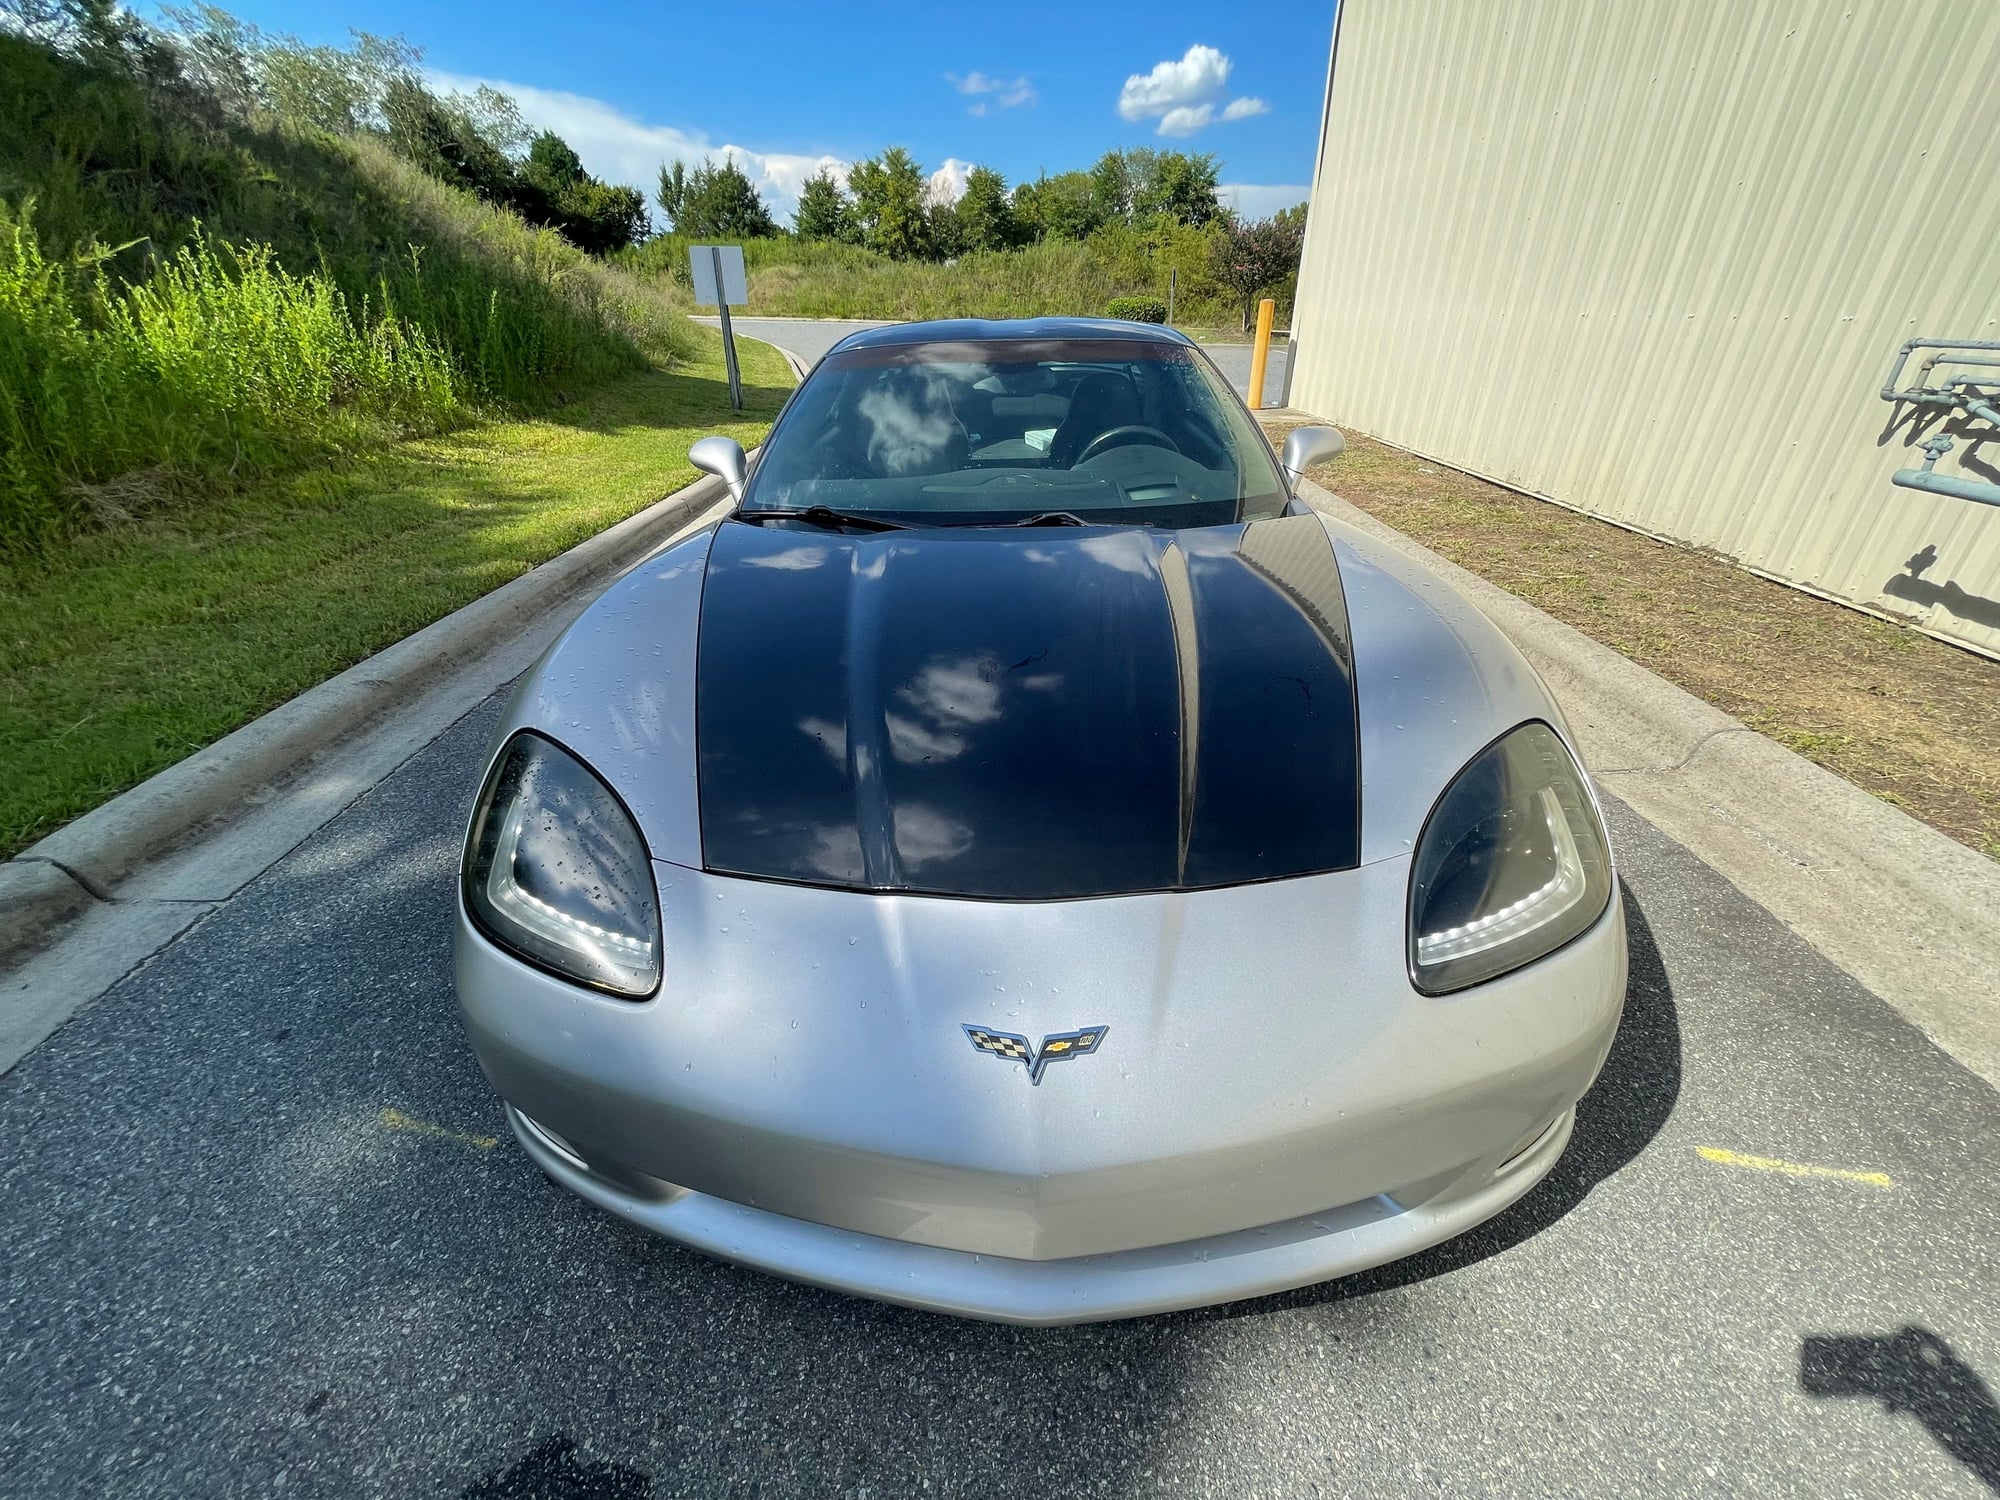 2006 Chevrolet Corvette - 2006 Chevrolet Corvette, needs work - Used - VIN 1G1YY26U065115493 - 124,993 Miles - 8 cyl - 2WD - Automatic - Coupe - Silver - Concord, NC 28027, United States